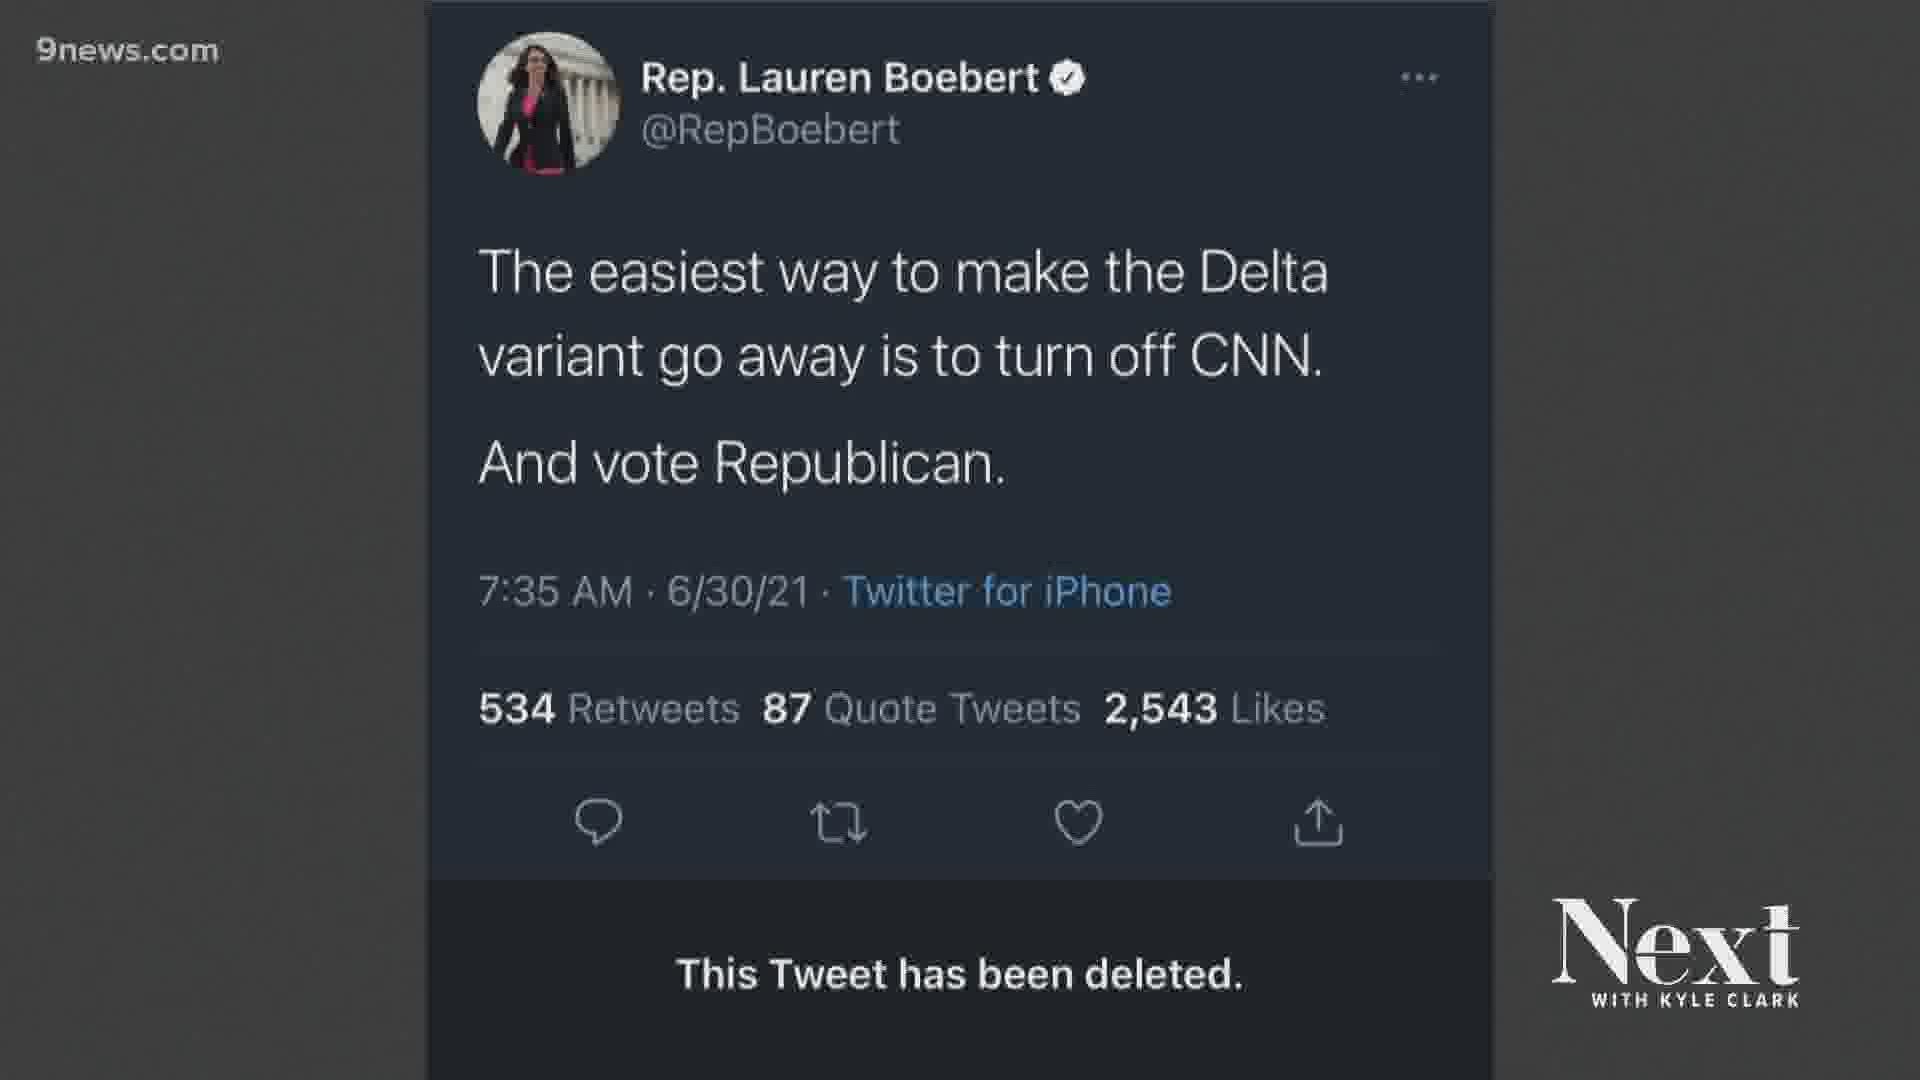 US Rep. Lauren Boebert (R-Rifle) suggested turning off CNN and voting for Republicans would make the Delta COVID variant disappear.